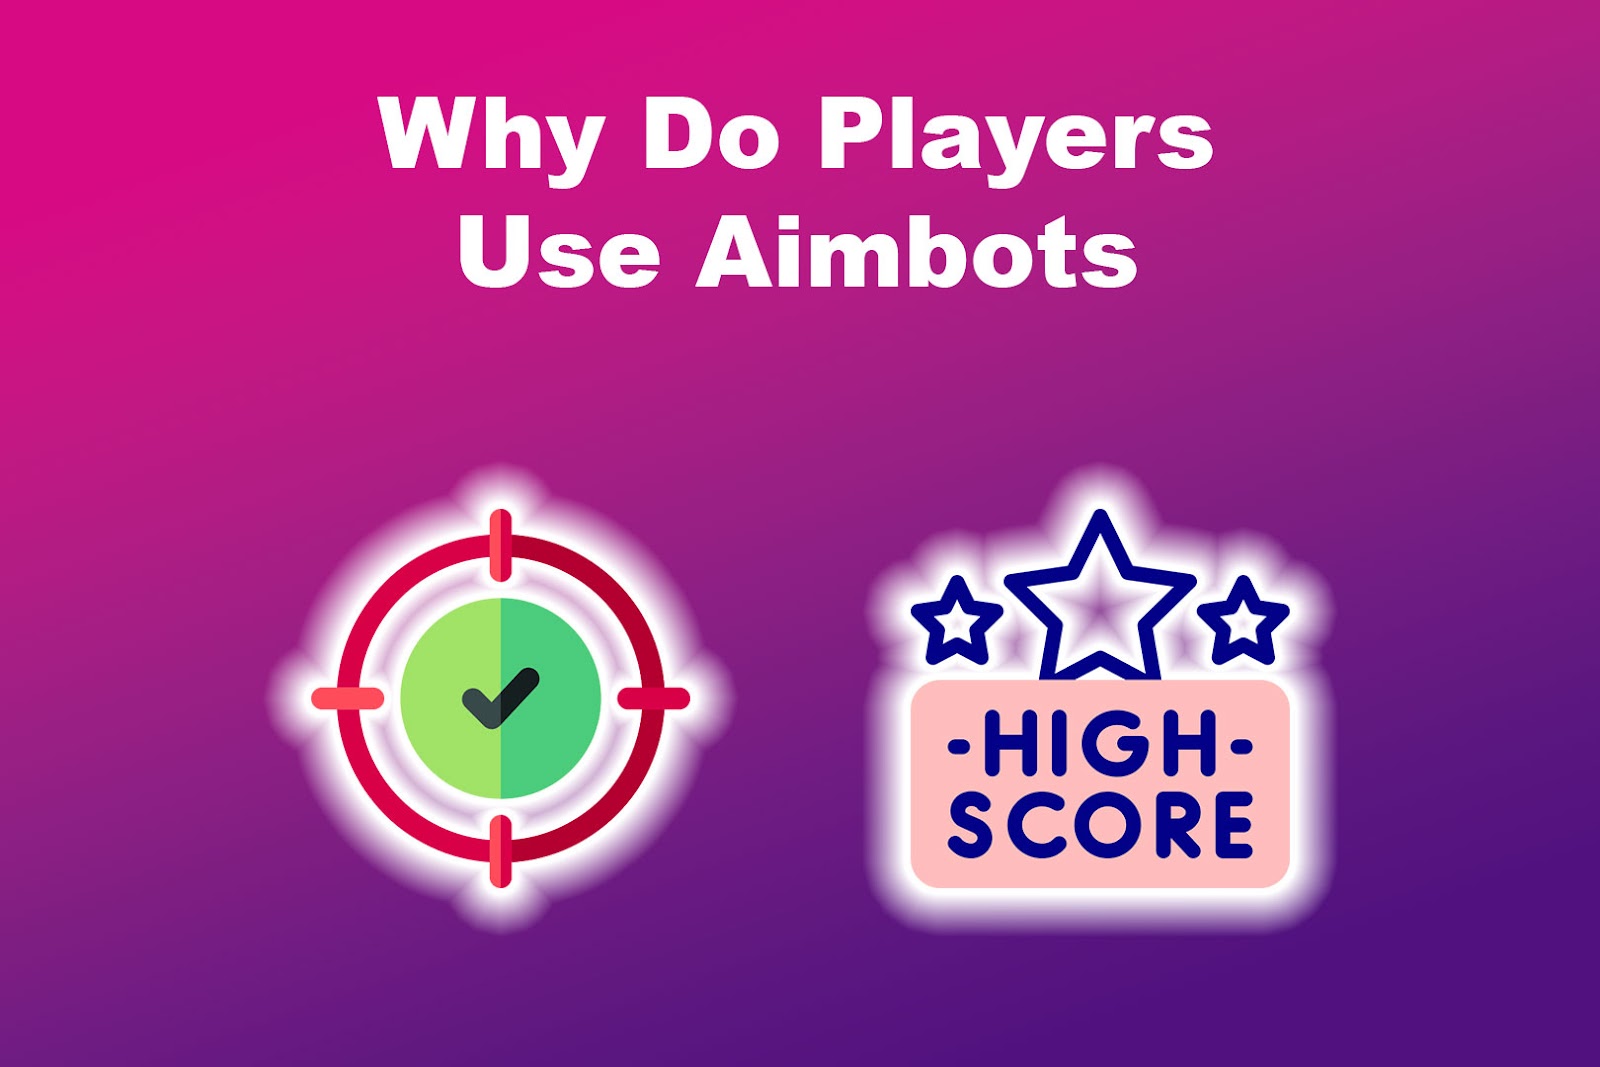 Why Do Players Use Aimbots